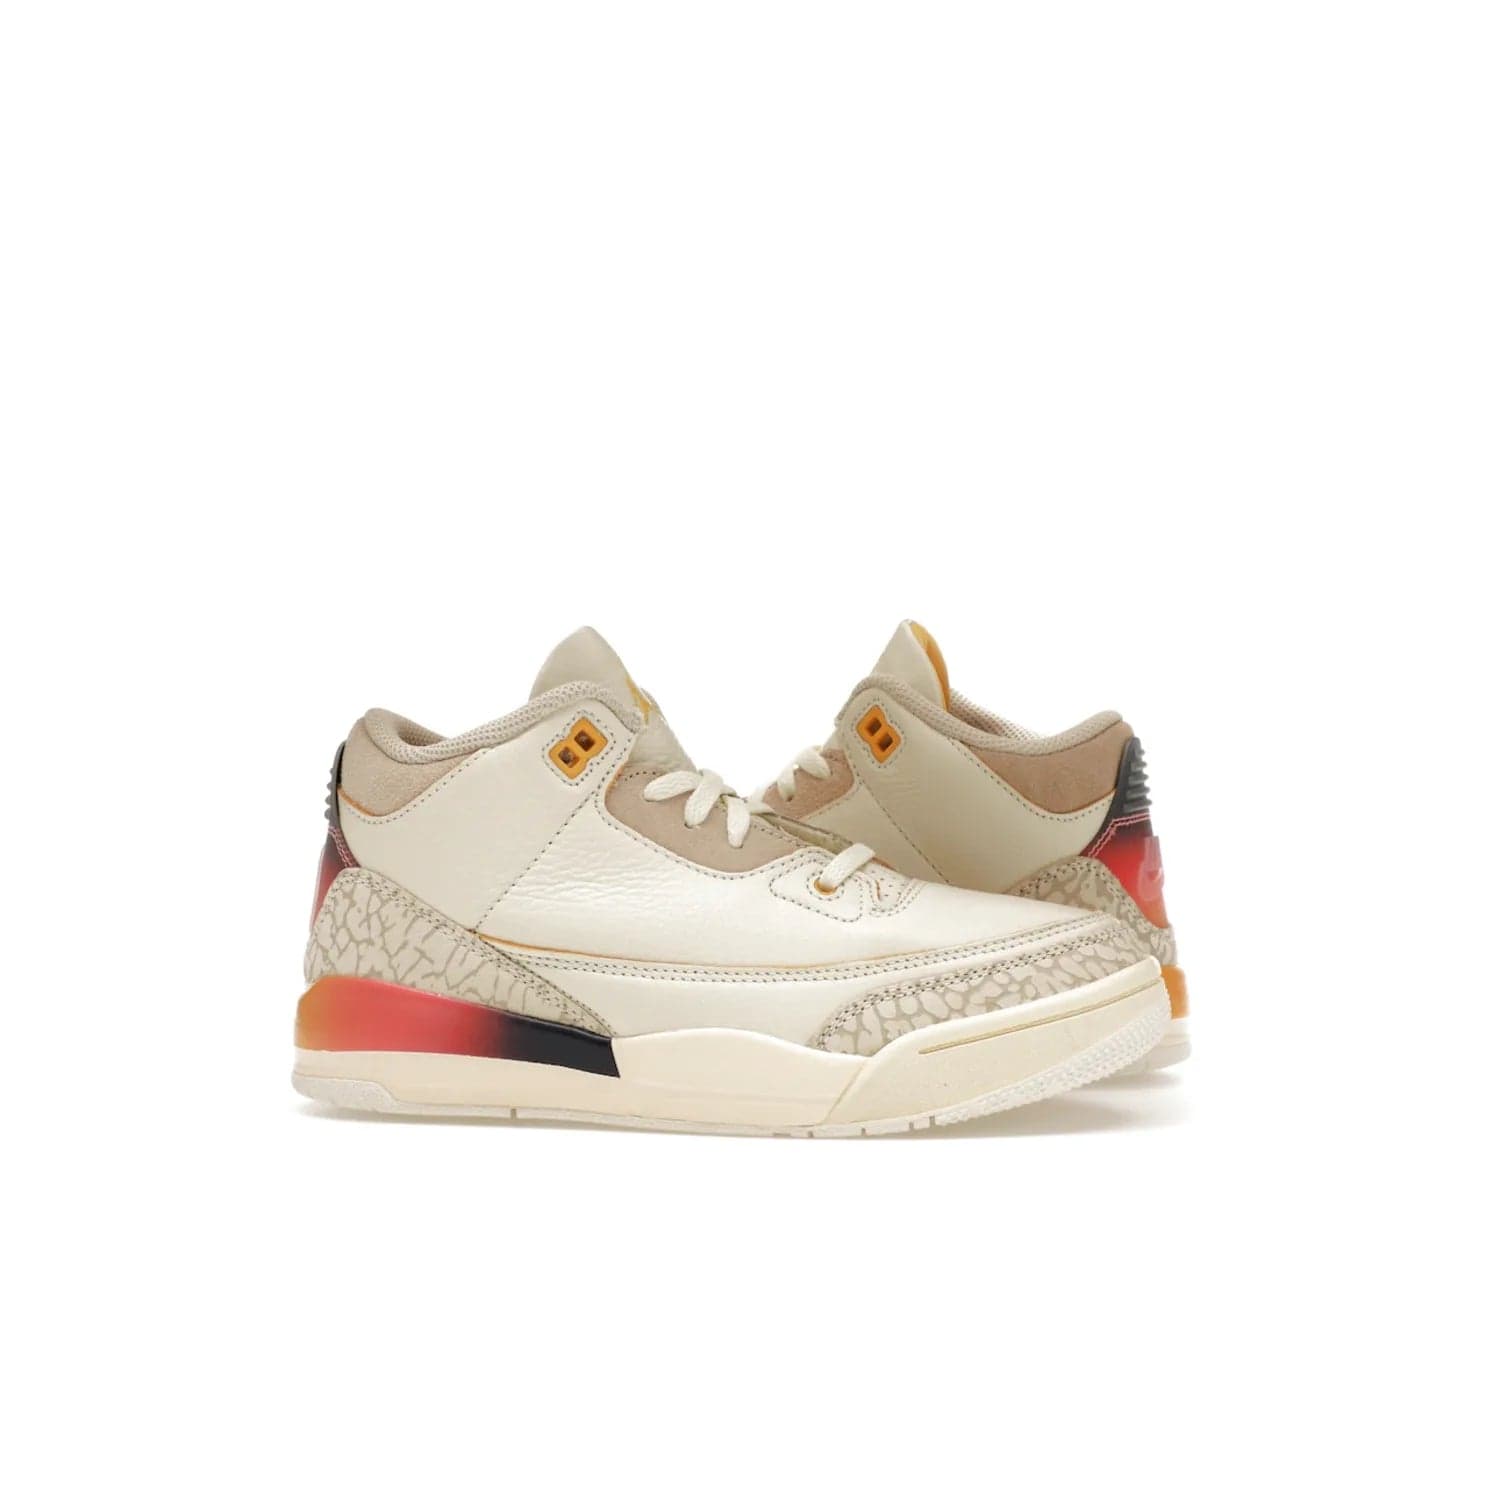 Jordan 3 Retro SP J Balvin Medellín Sunset (PS) - Image 2 - Only at www.BallersClubKickz.com - Jordan 3 Retro SP J Balvin Medellín Sunset (PS) arrives 2023-09-23. Add an edgy touch to your look with this vibrant multi-color sneaker.